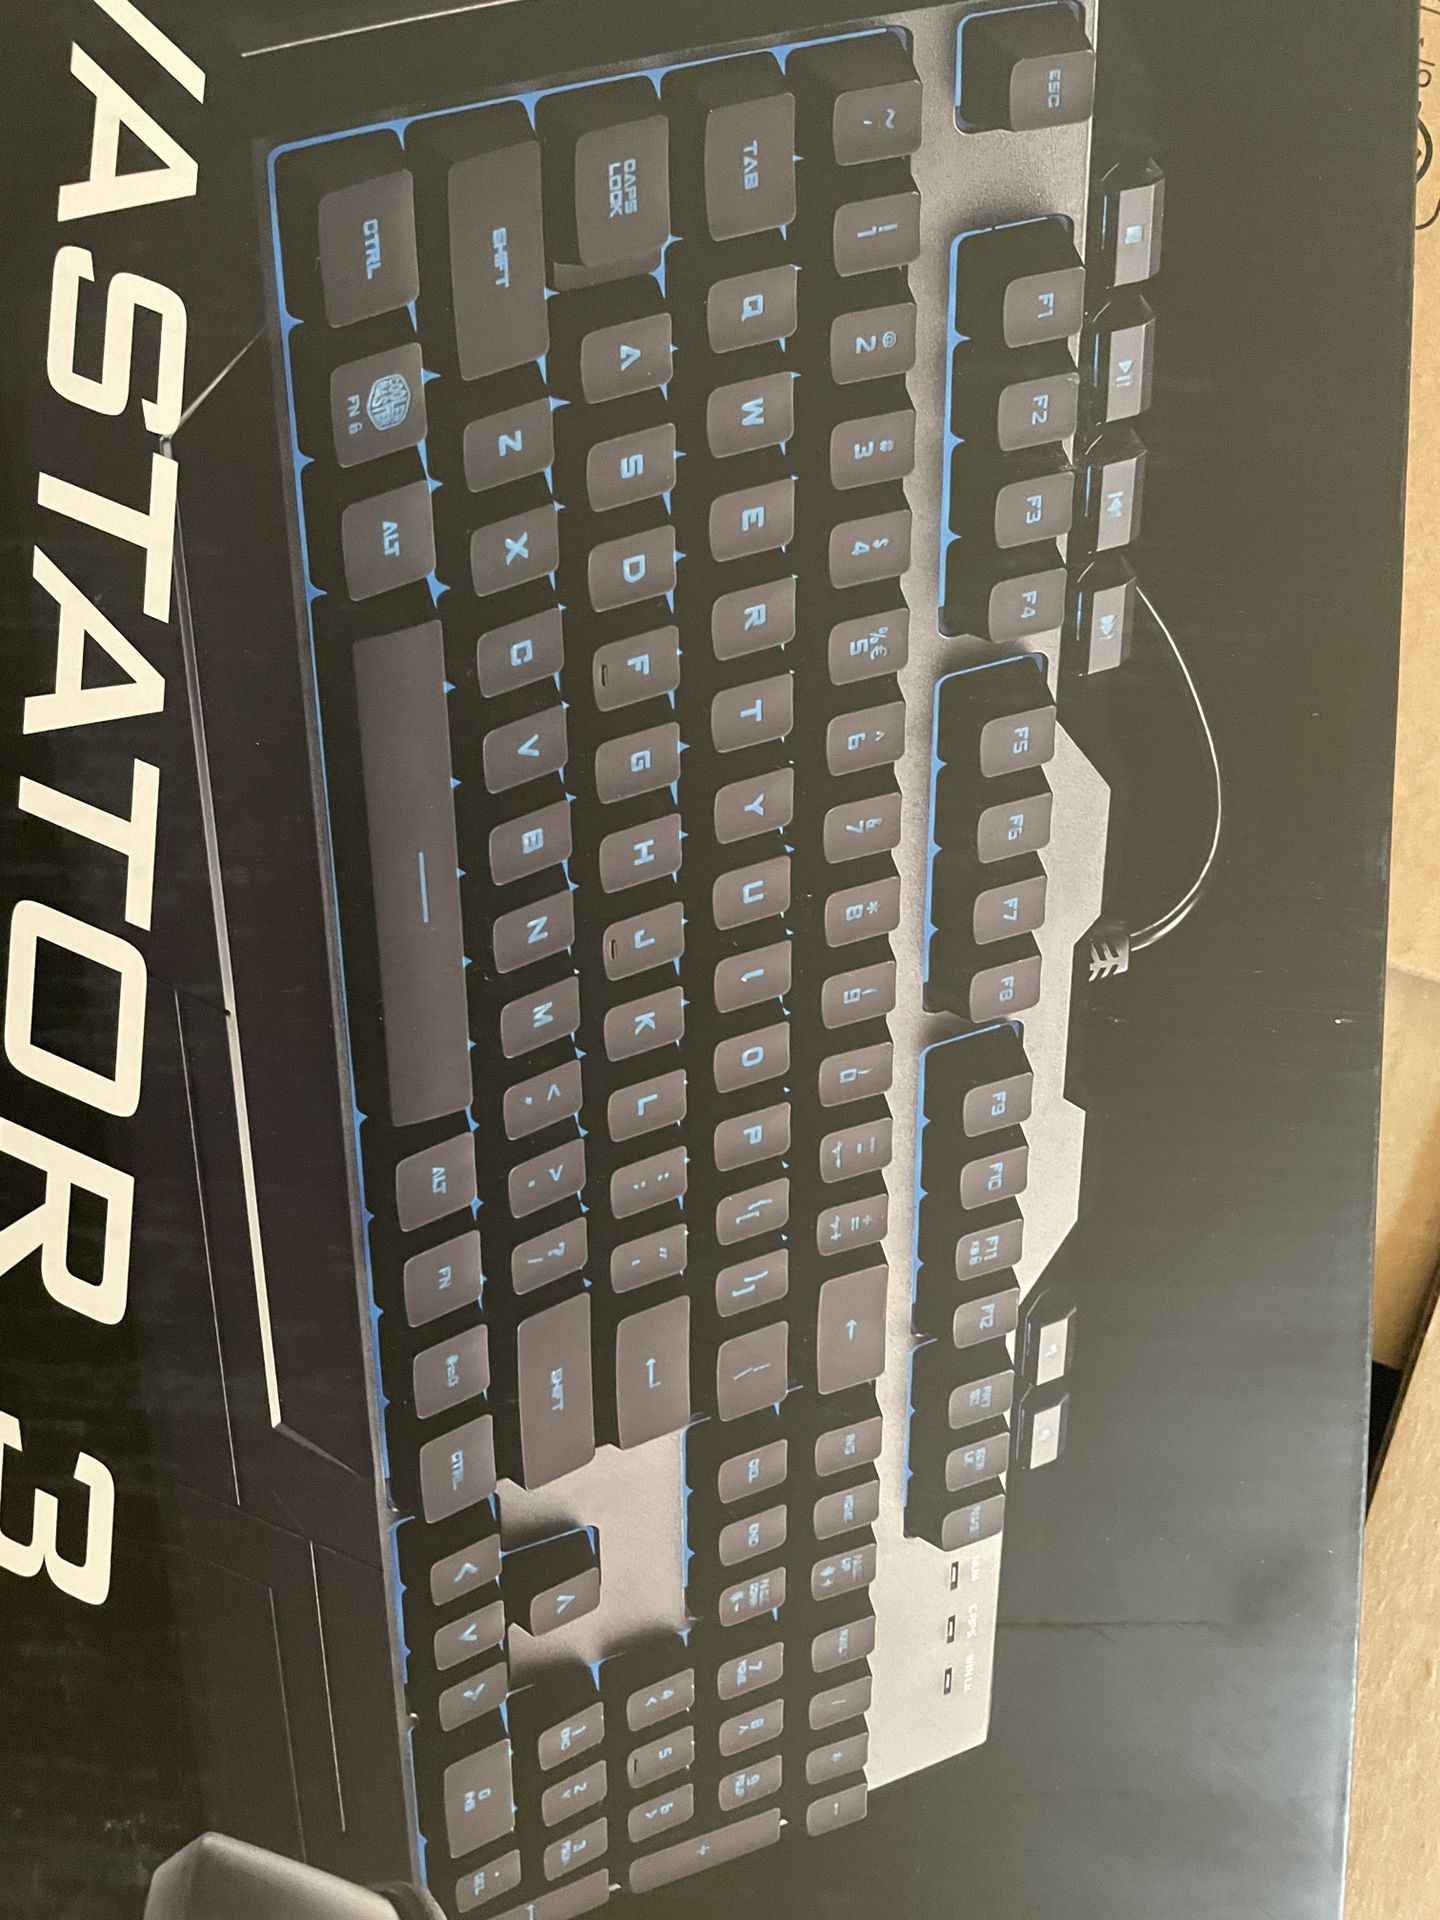 Cooler Master Gaming keyboard/Mouse Combo